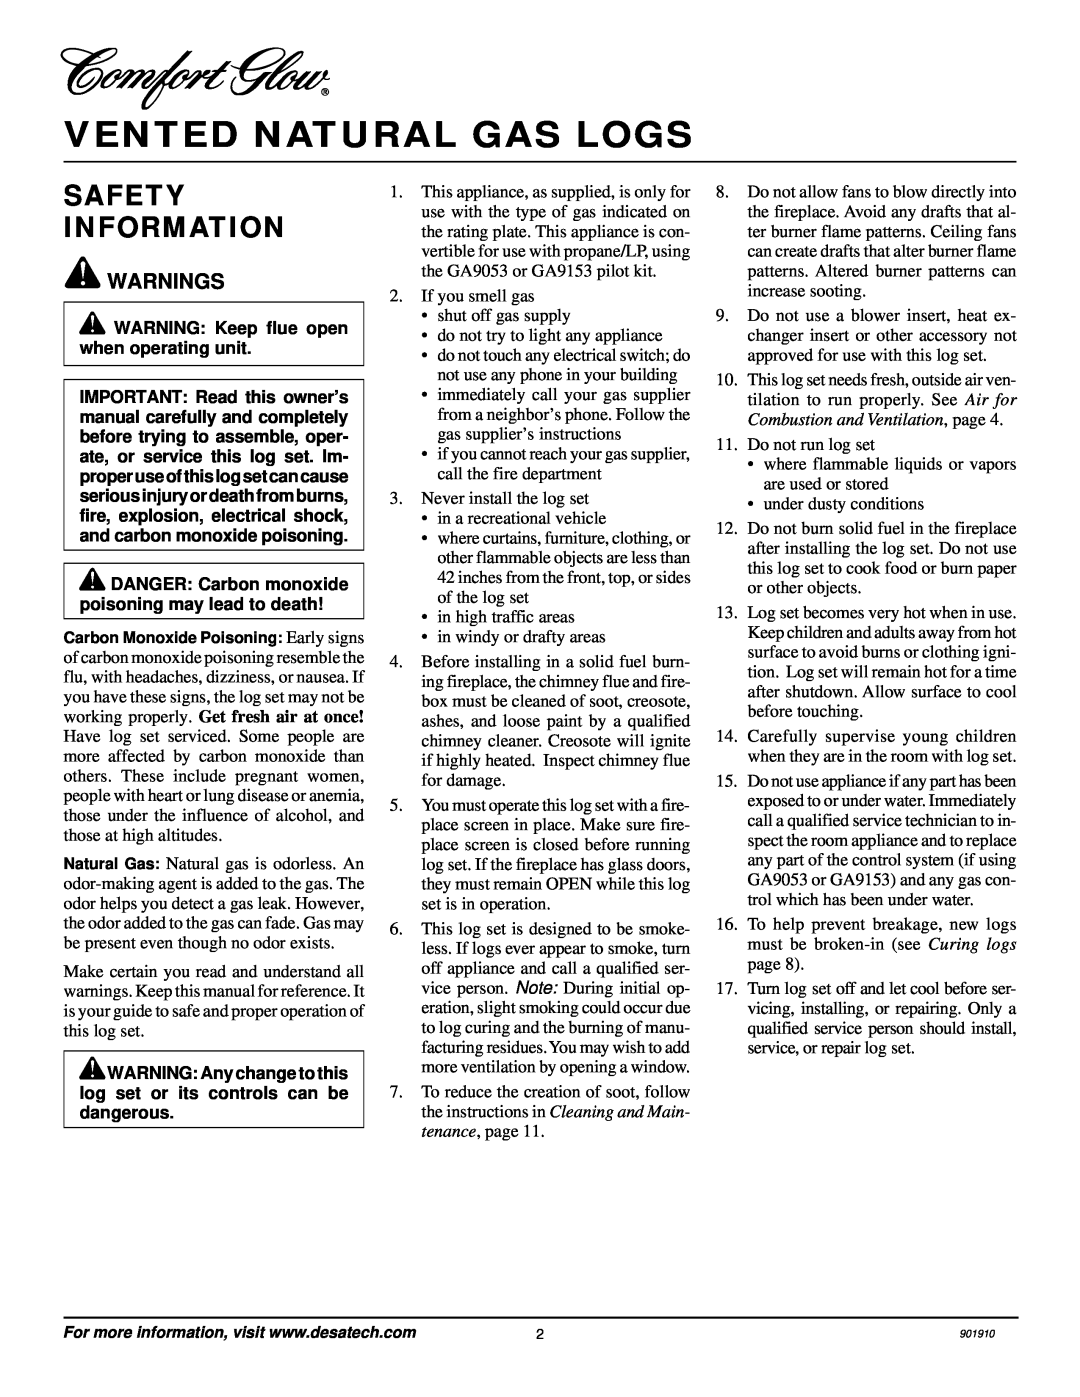 Desa 901910-01A.pdf installation manual Vented Natural Gas Logs, Safety Information 